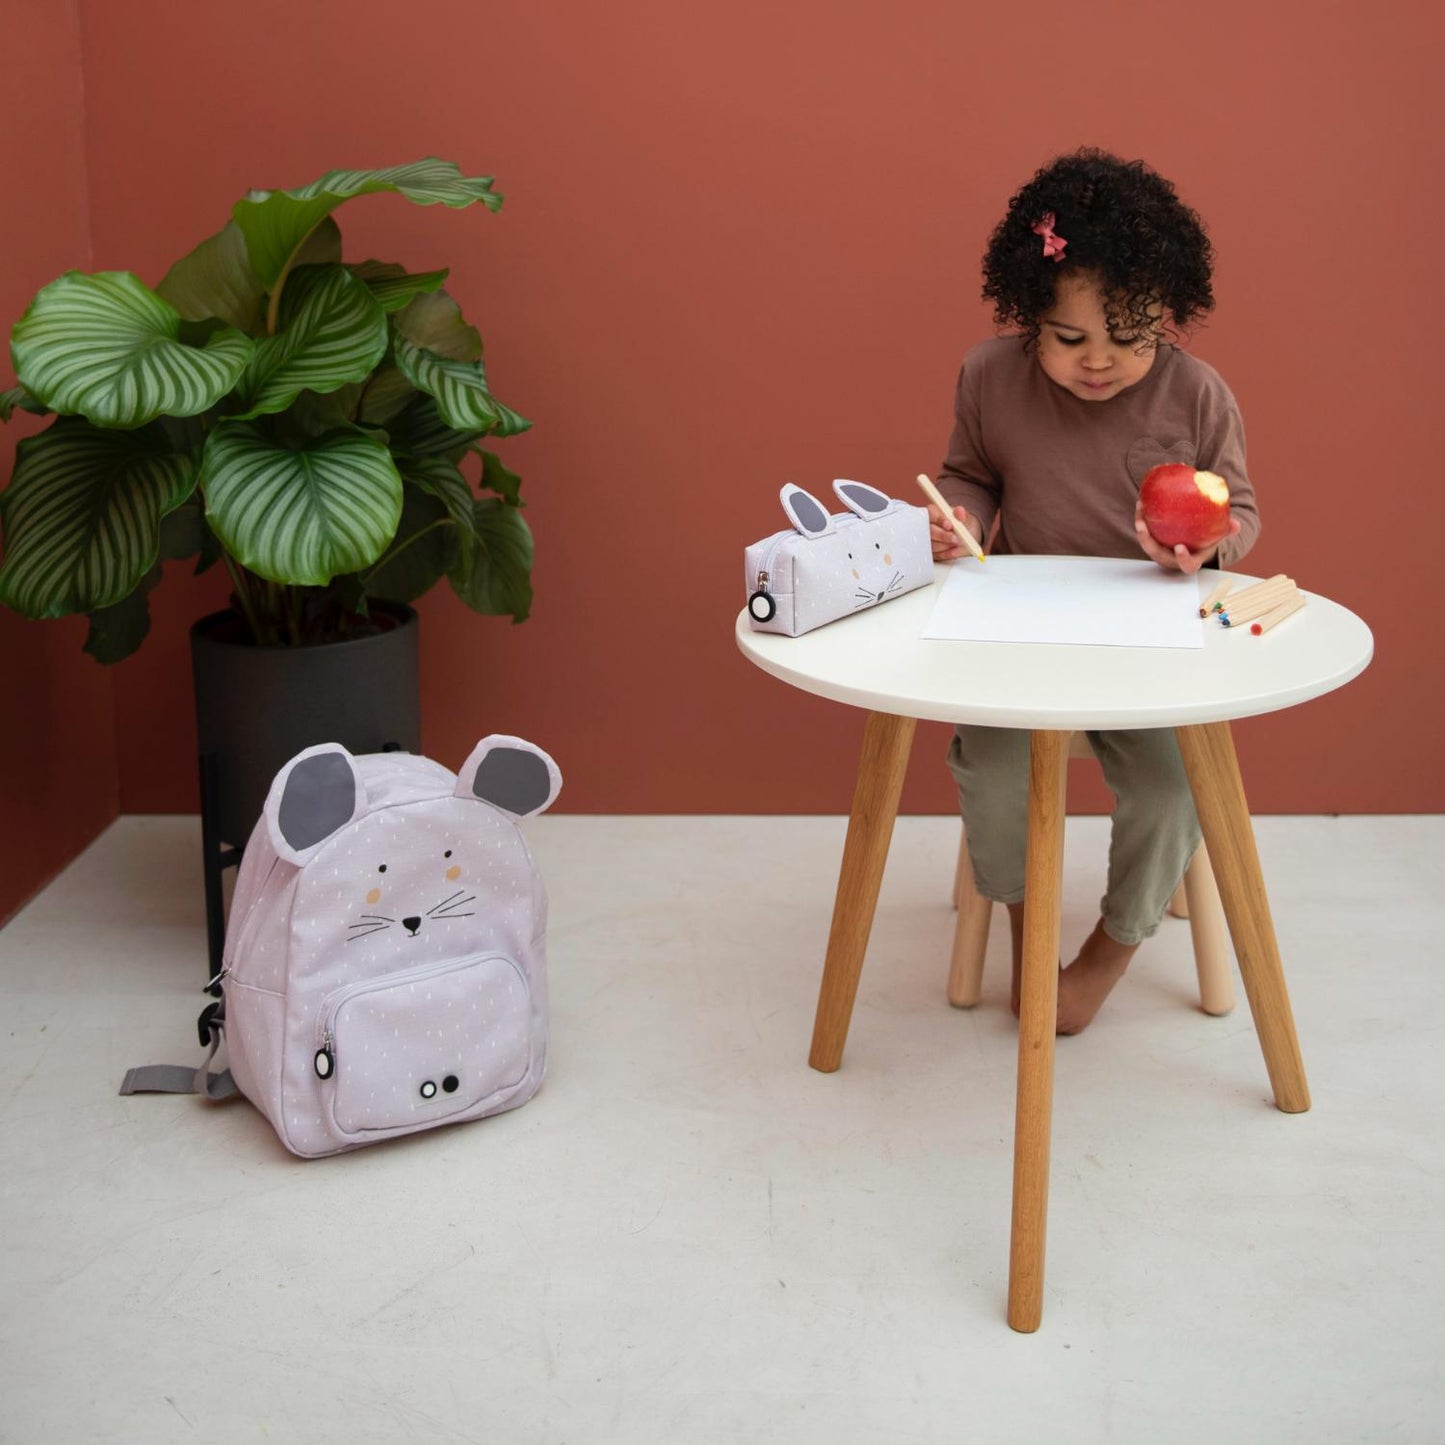 Trixie Mrs. Mouse Backpack | Kid’s Backpack for Creche, Nursery & School | Lifestyle: Girl with Backpack | BeoVERDE.ie